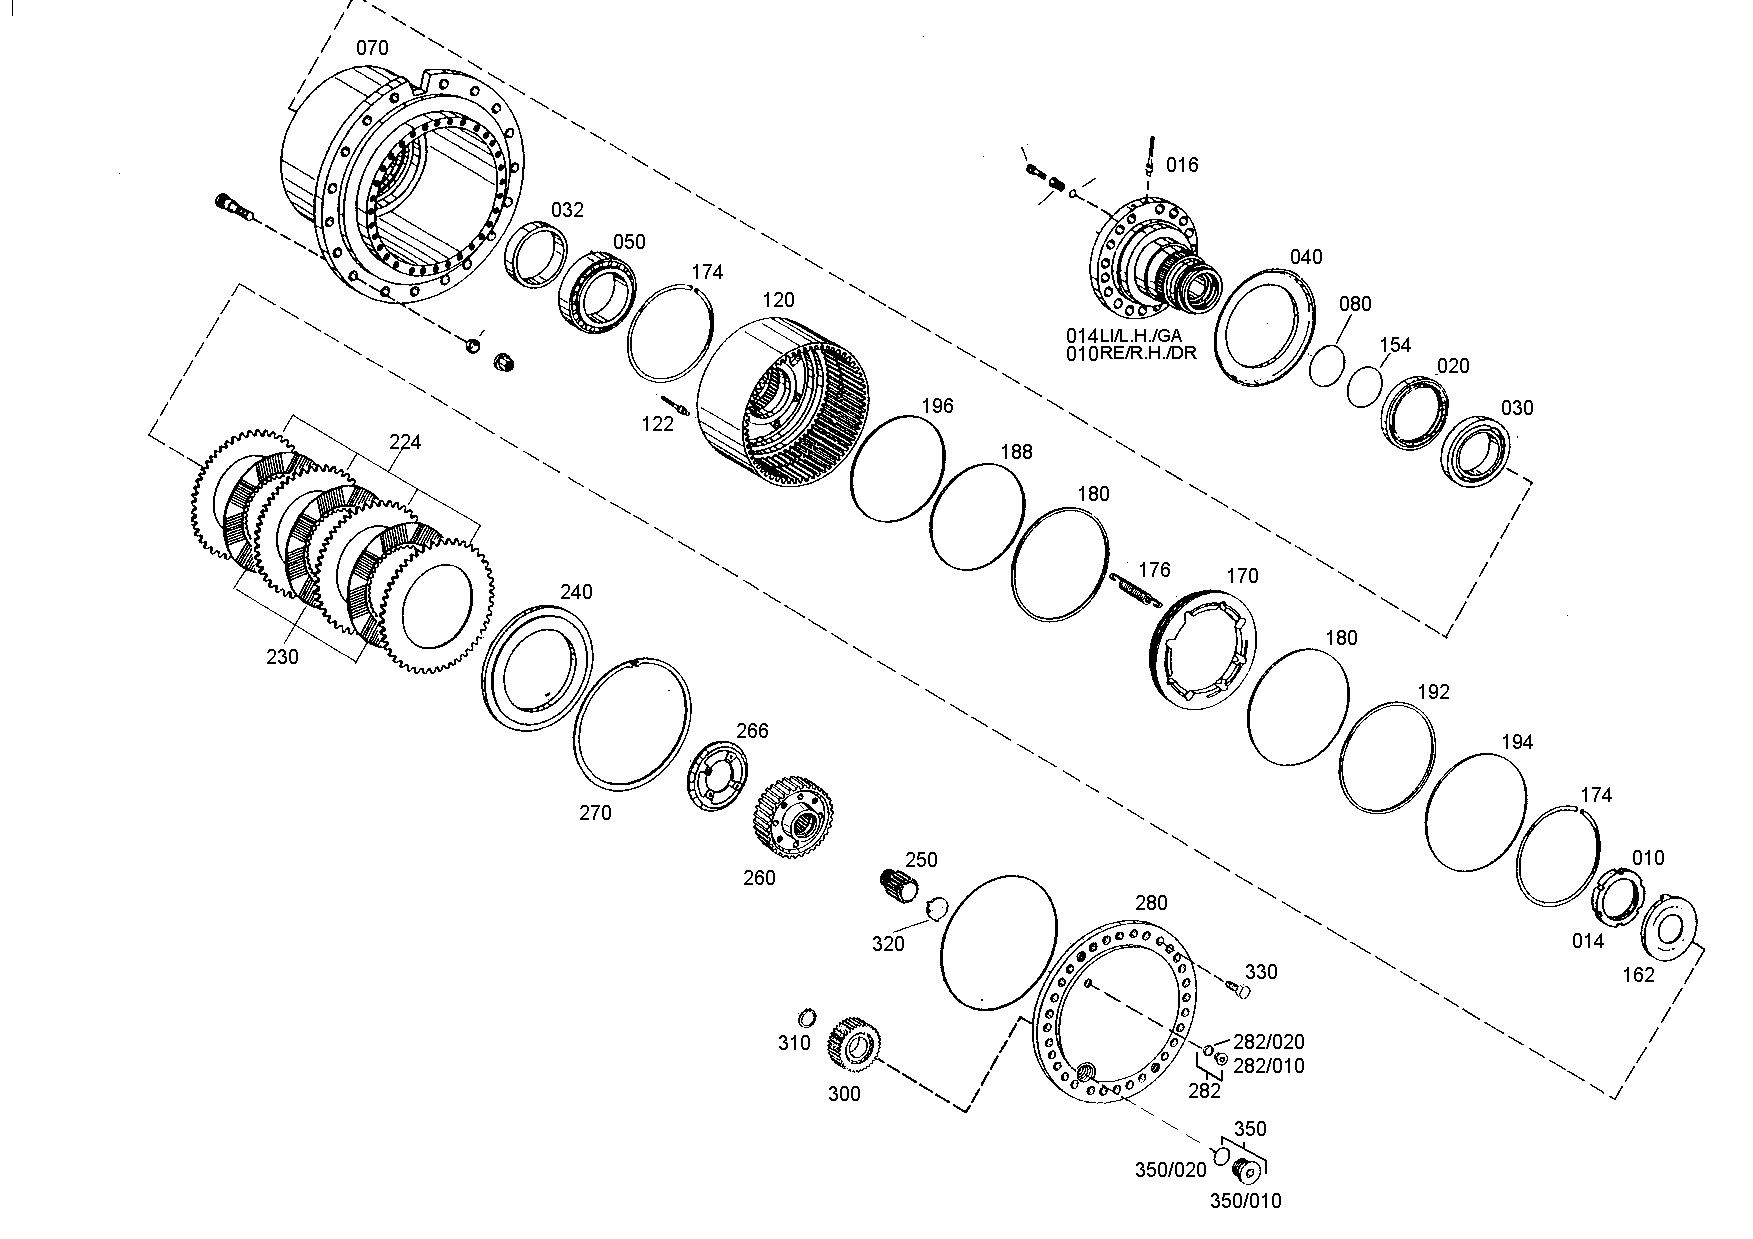 drawing for LIEBHERR GMBH 7623429 - PLANET CARRIER (figure 3)